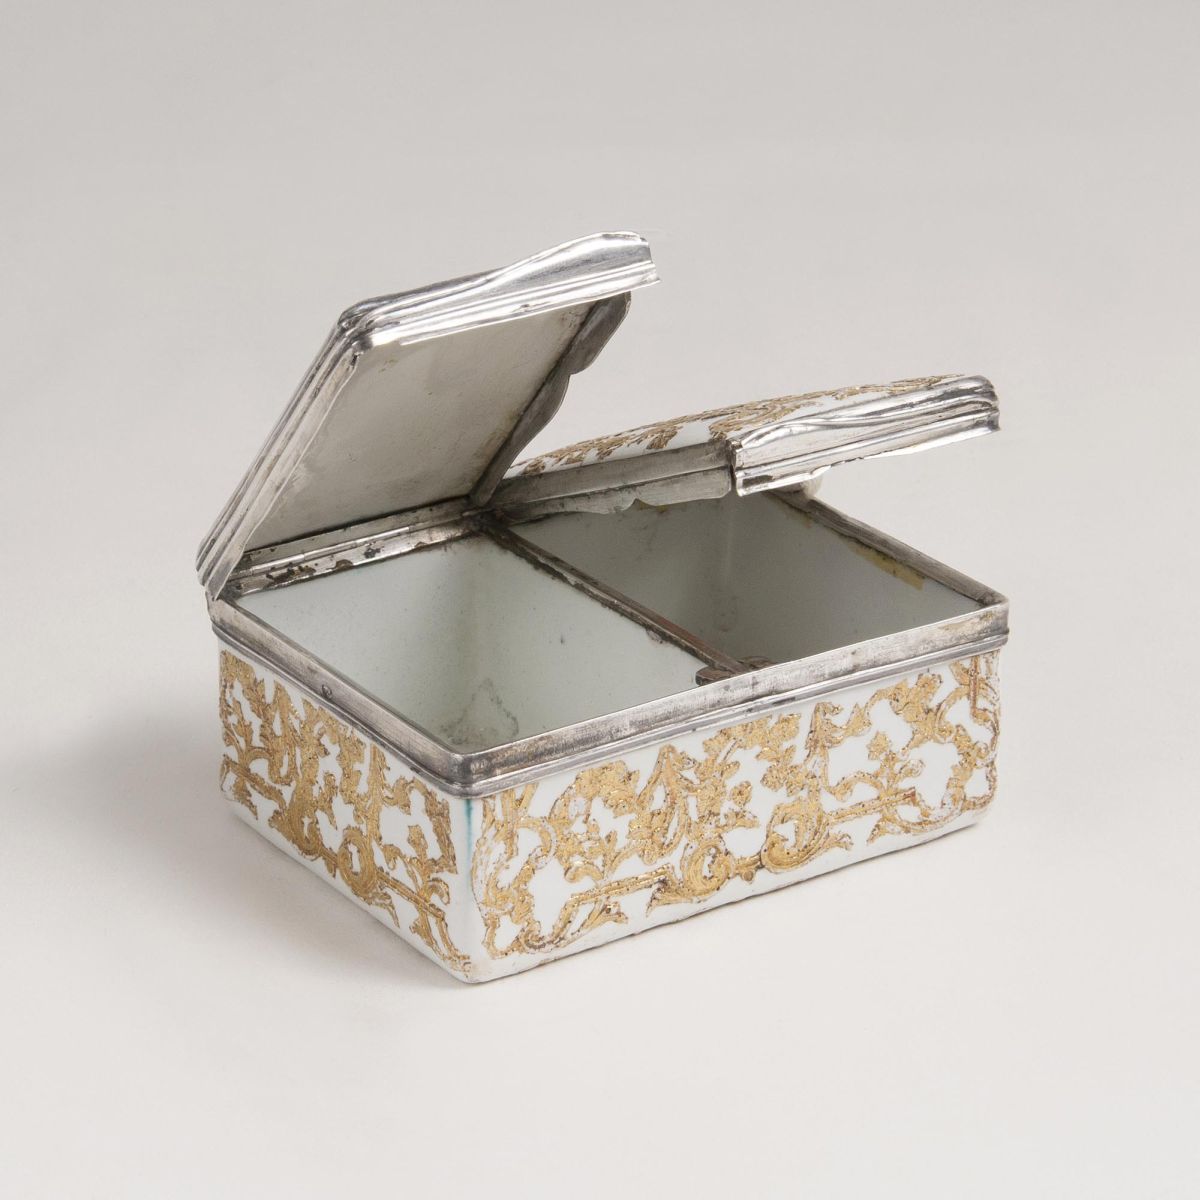 A Berlin Enamel Snuff Box with Gold Relief Decor - image 2